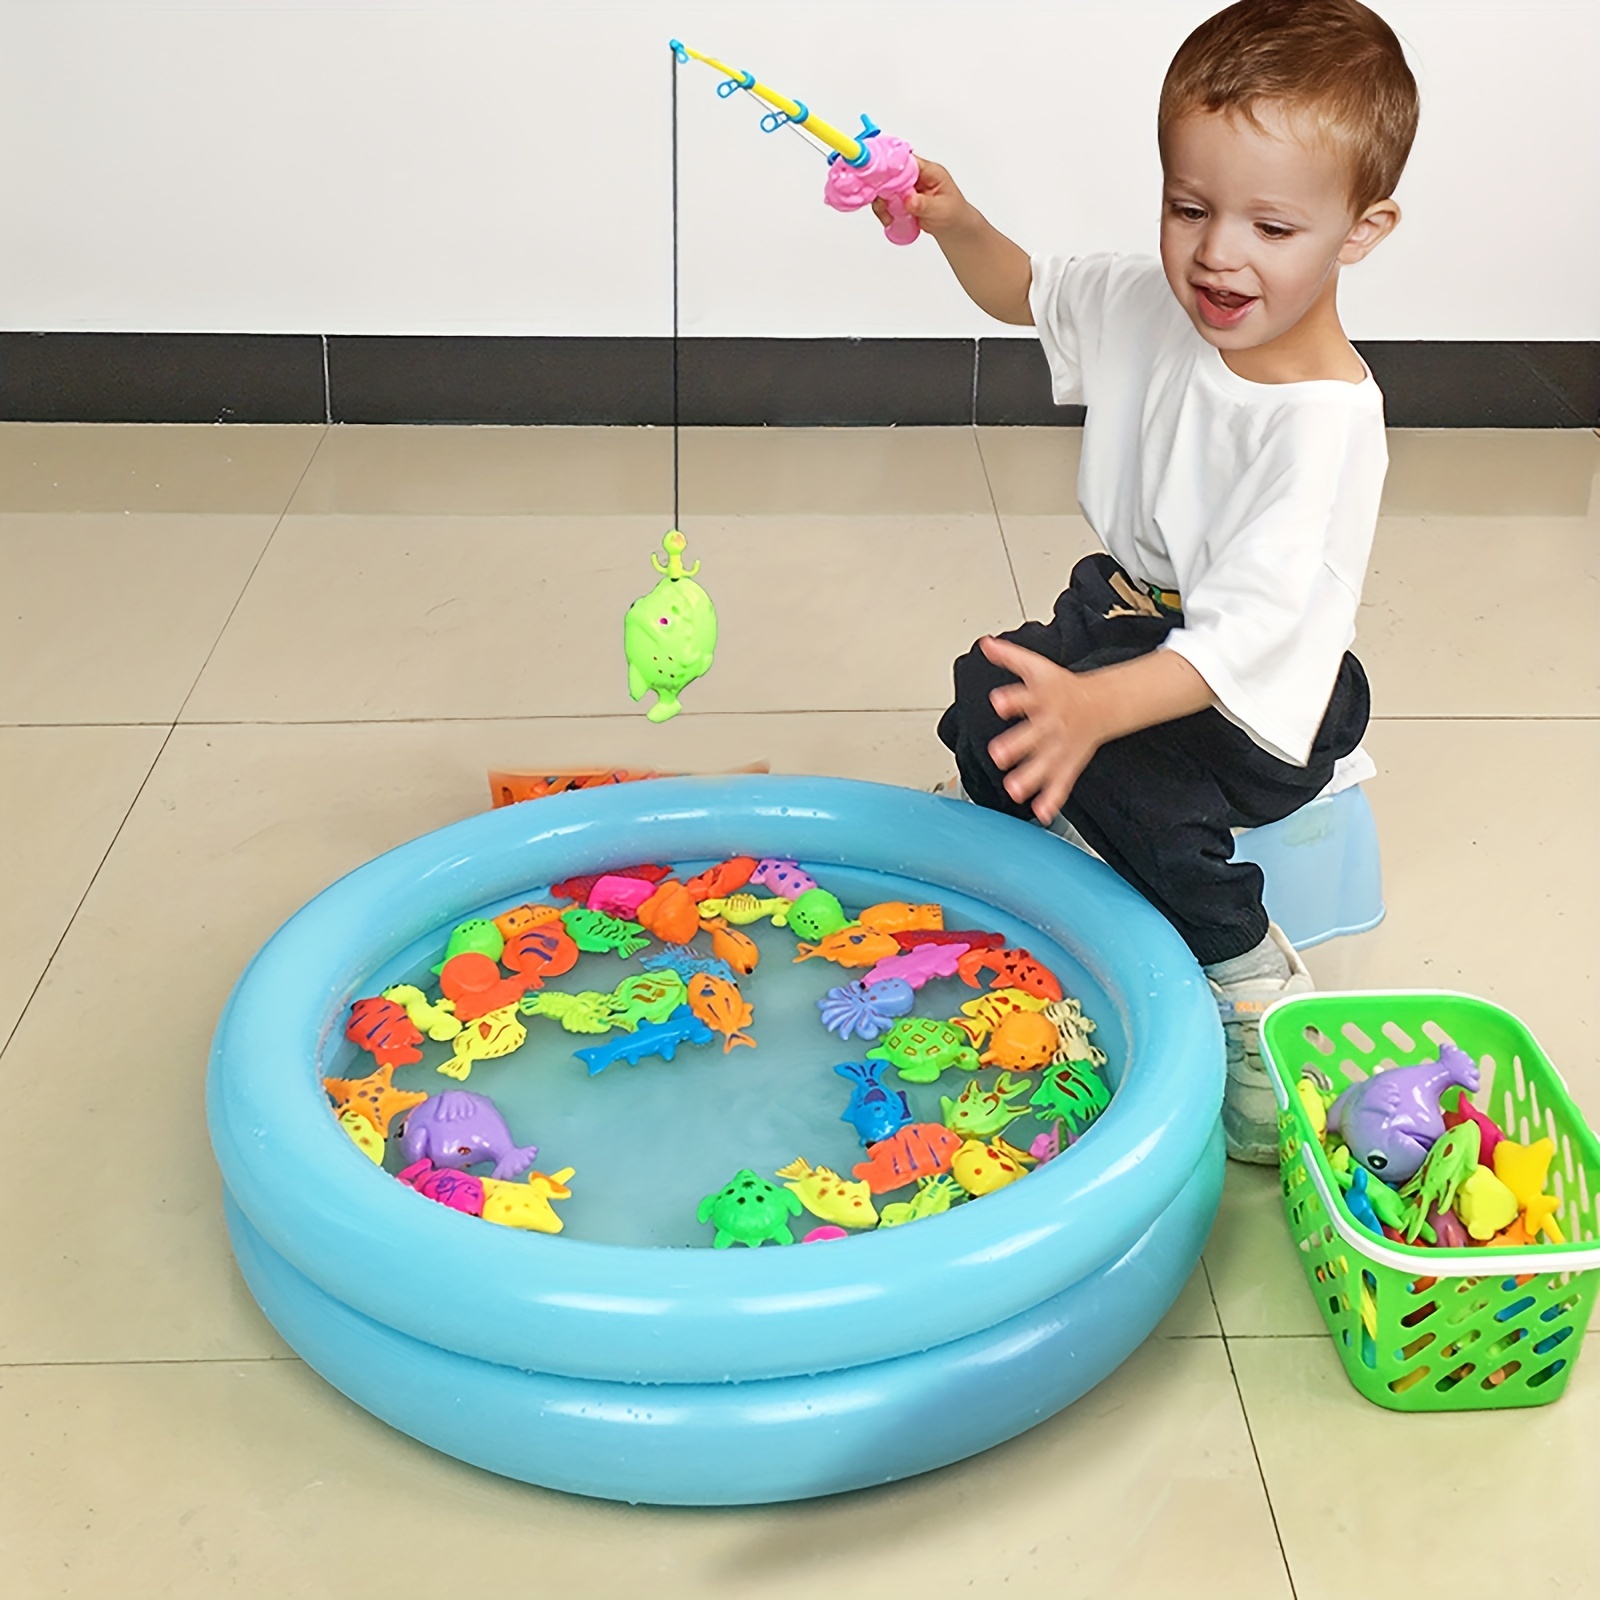 TEMI Fishing Toy for Kids with 60cm Pool Pretend Play Fishing Game